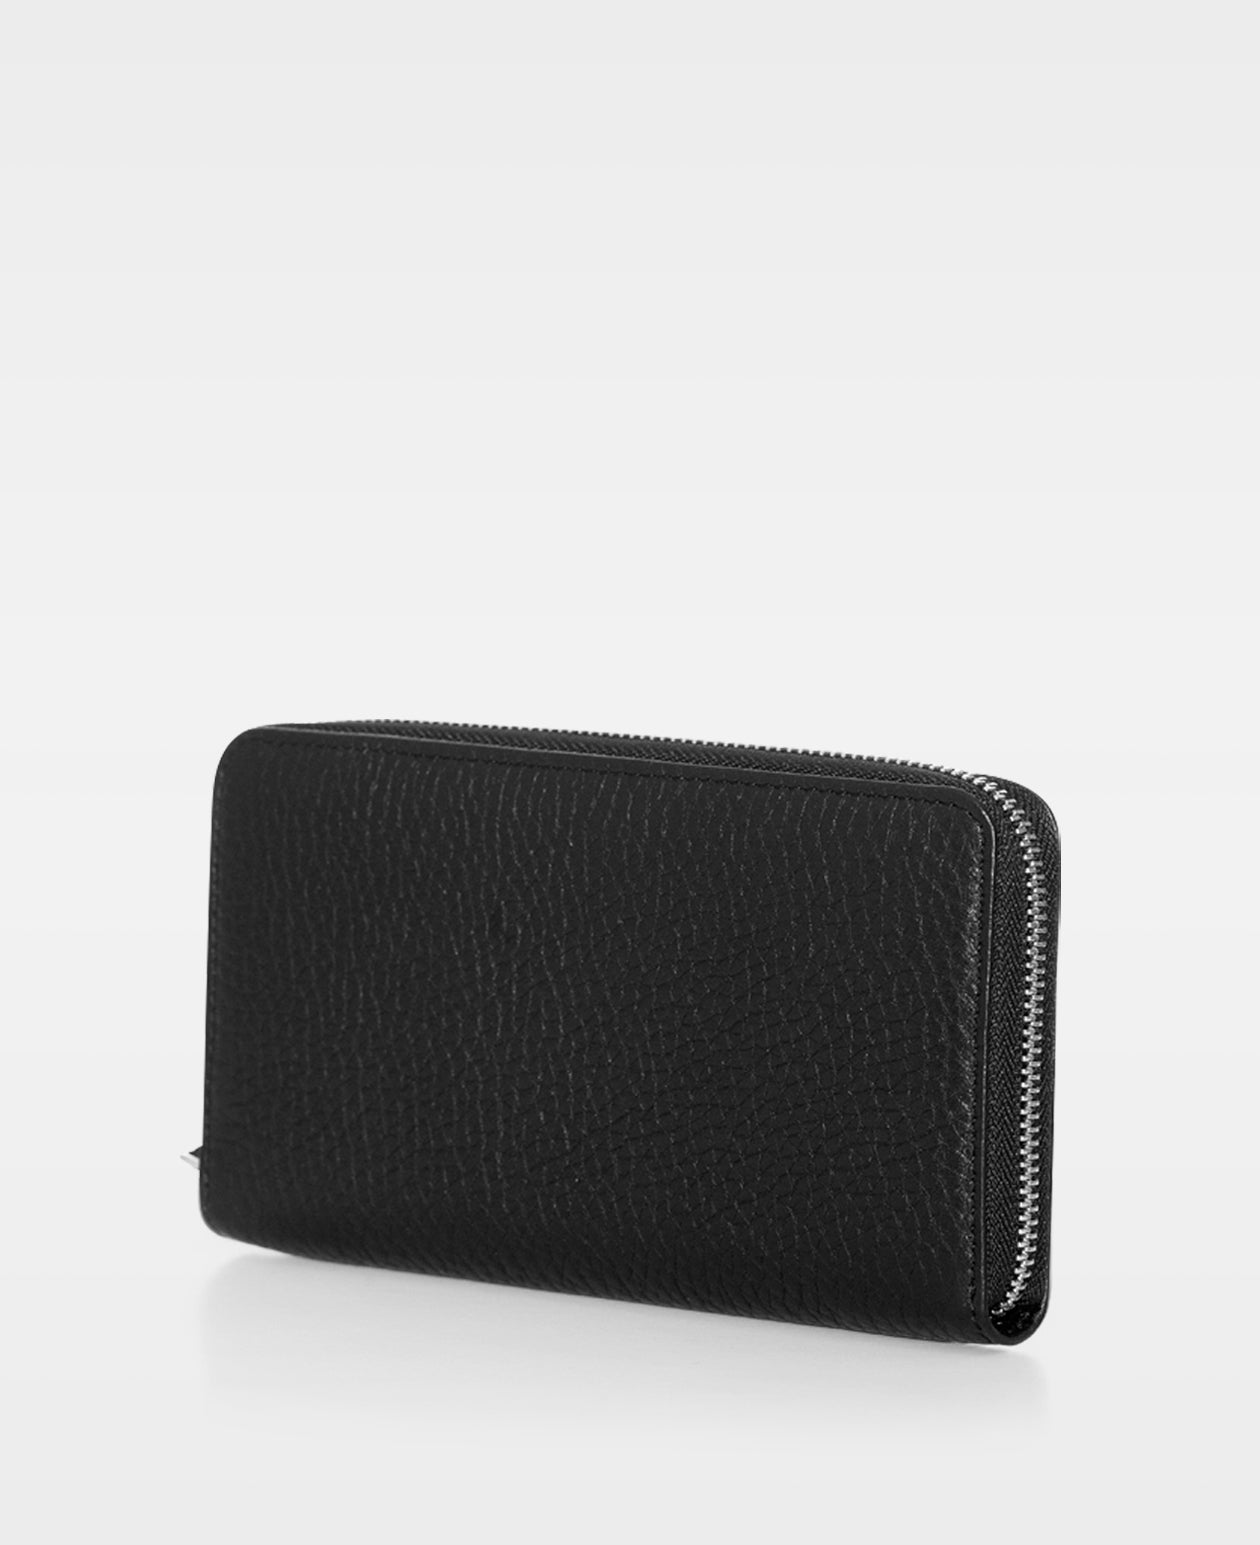 Together for Now Women's Black Leather Wallet